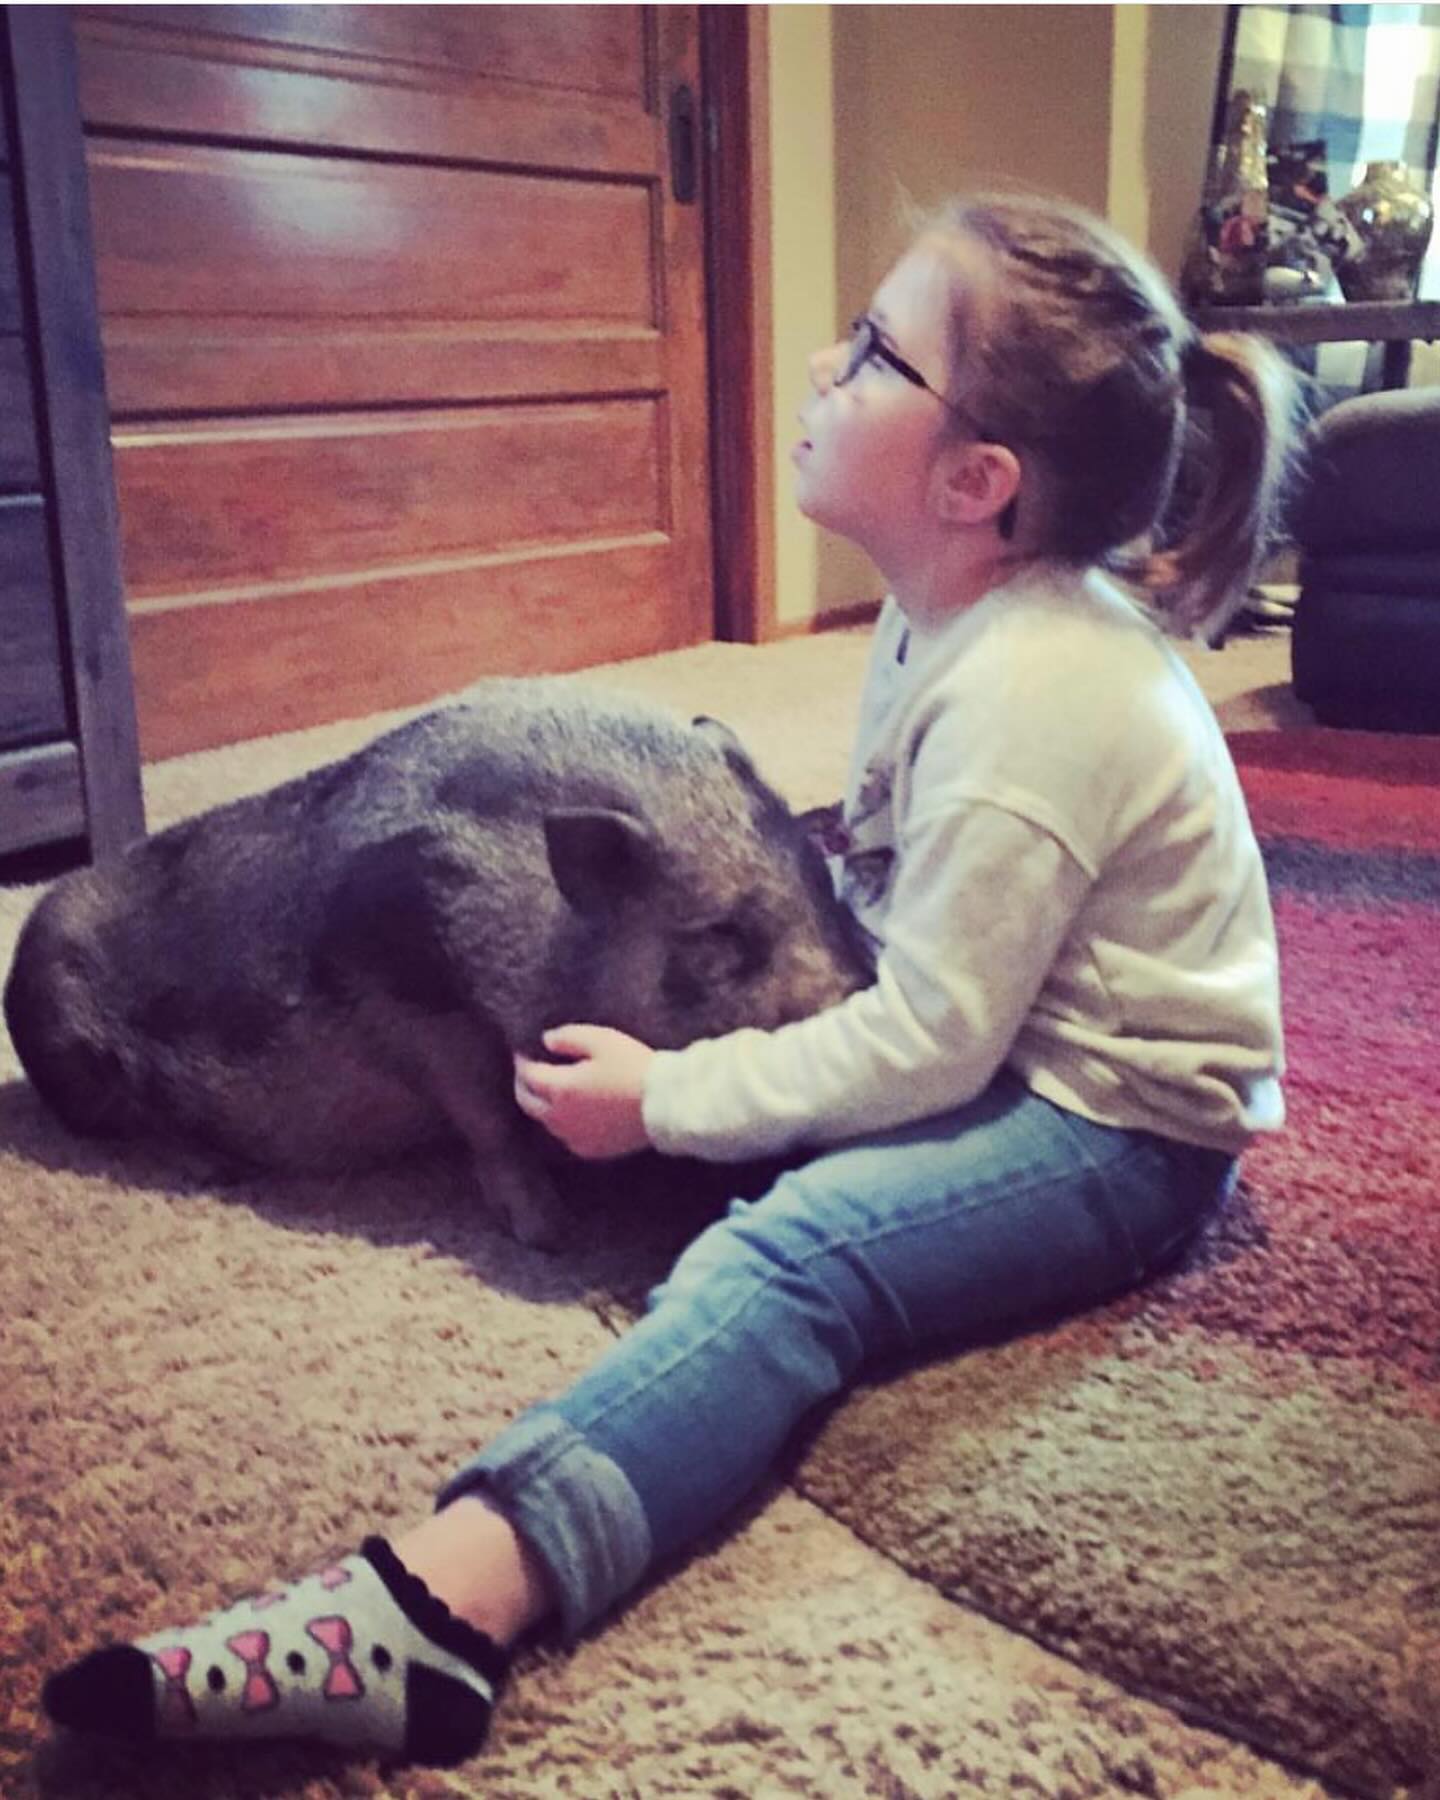 The MTV alum included pics of a young Aubree with Pete and the pig relaxing on its side